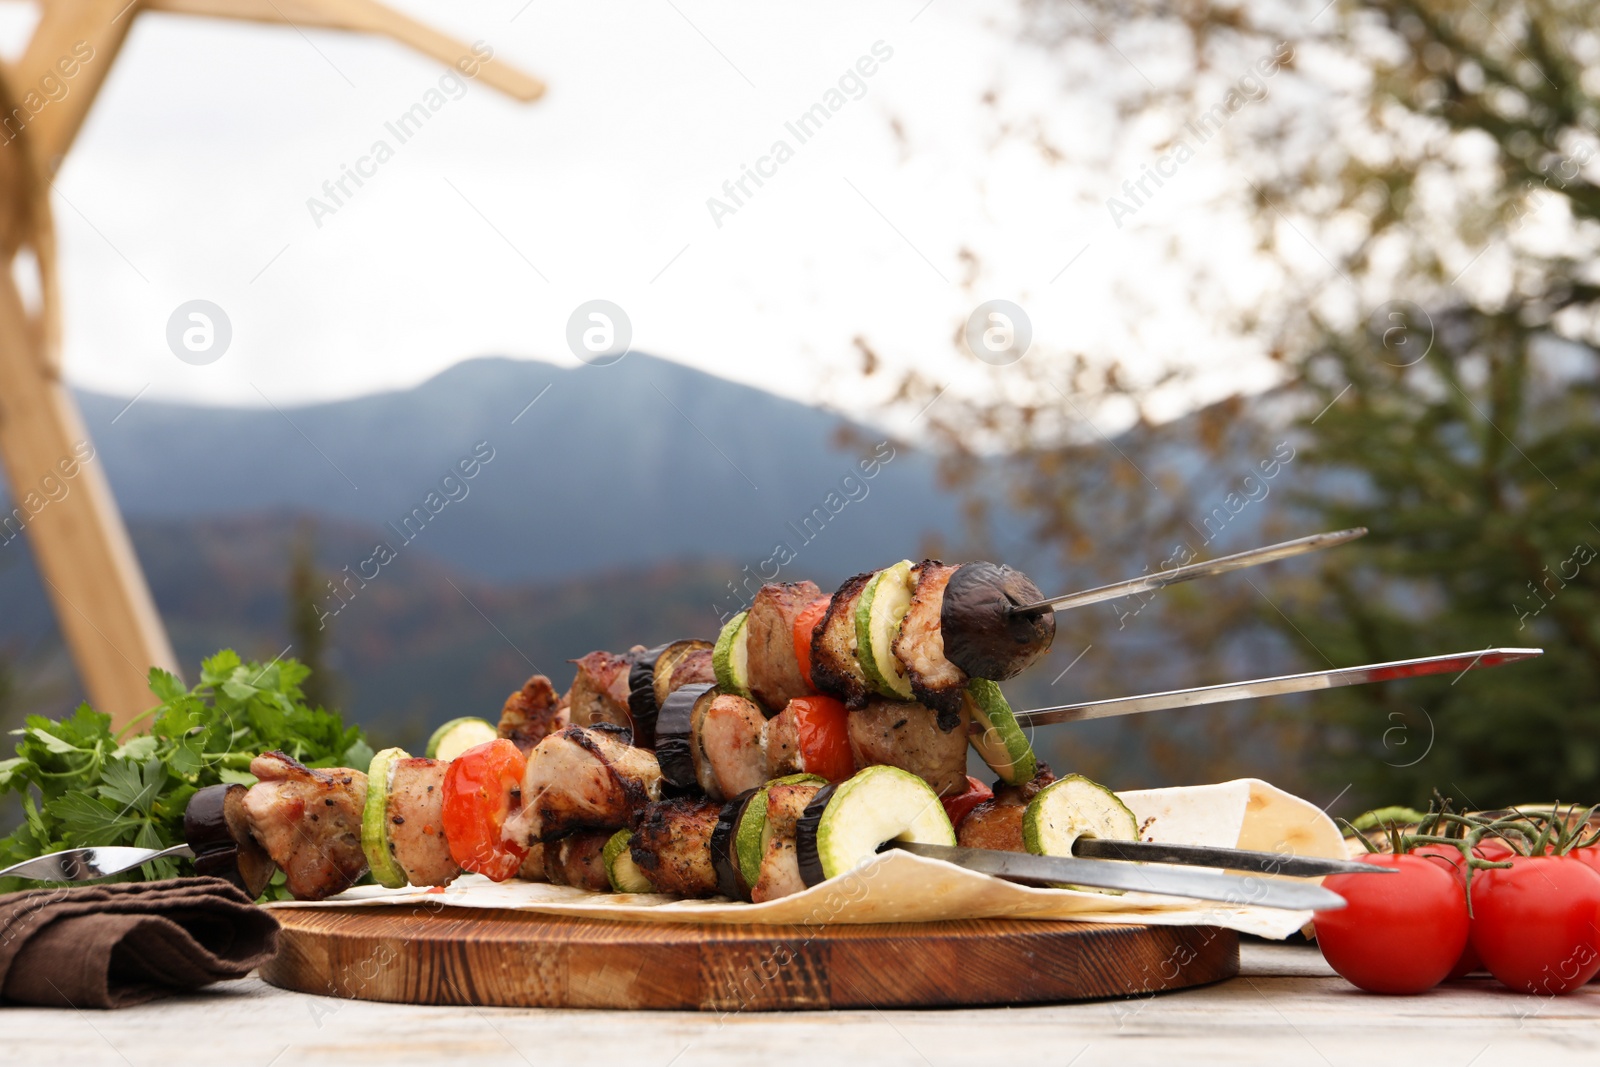 Photo of Metal skewers with delicious meat and vegetables served on wooden table against mountain landscape